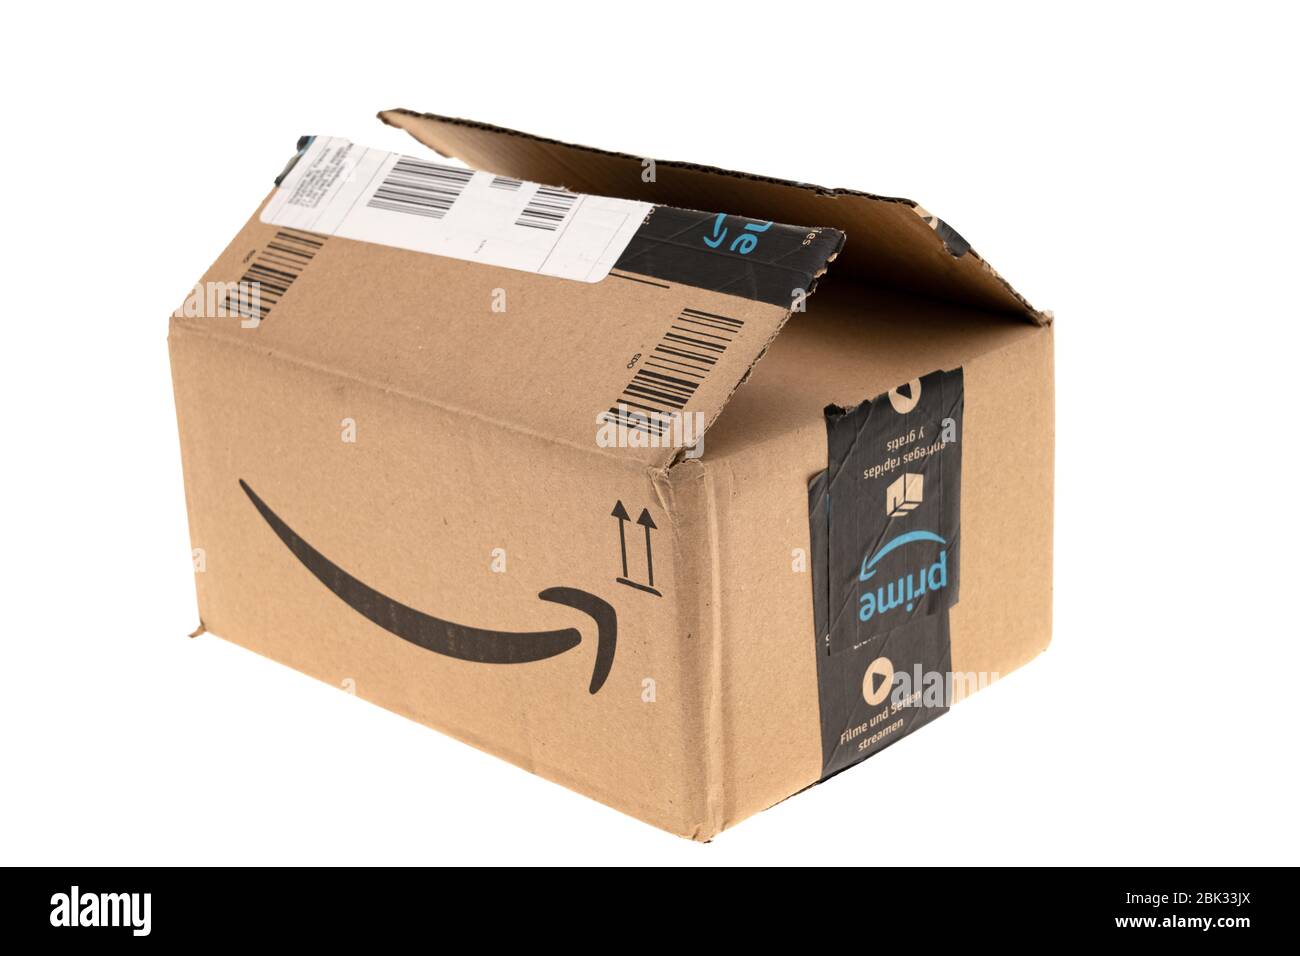 London, United Kingdom - April 10, 2020: Opened Amazon Prime shipping  package or box on a white background. Amazon.com went online in 1995 and is  now Stock Photo - Alamy